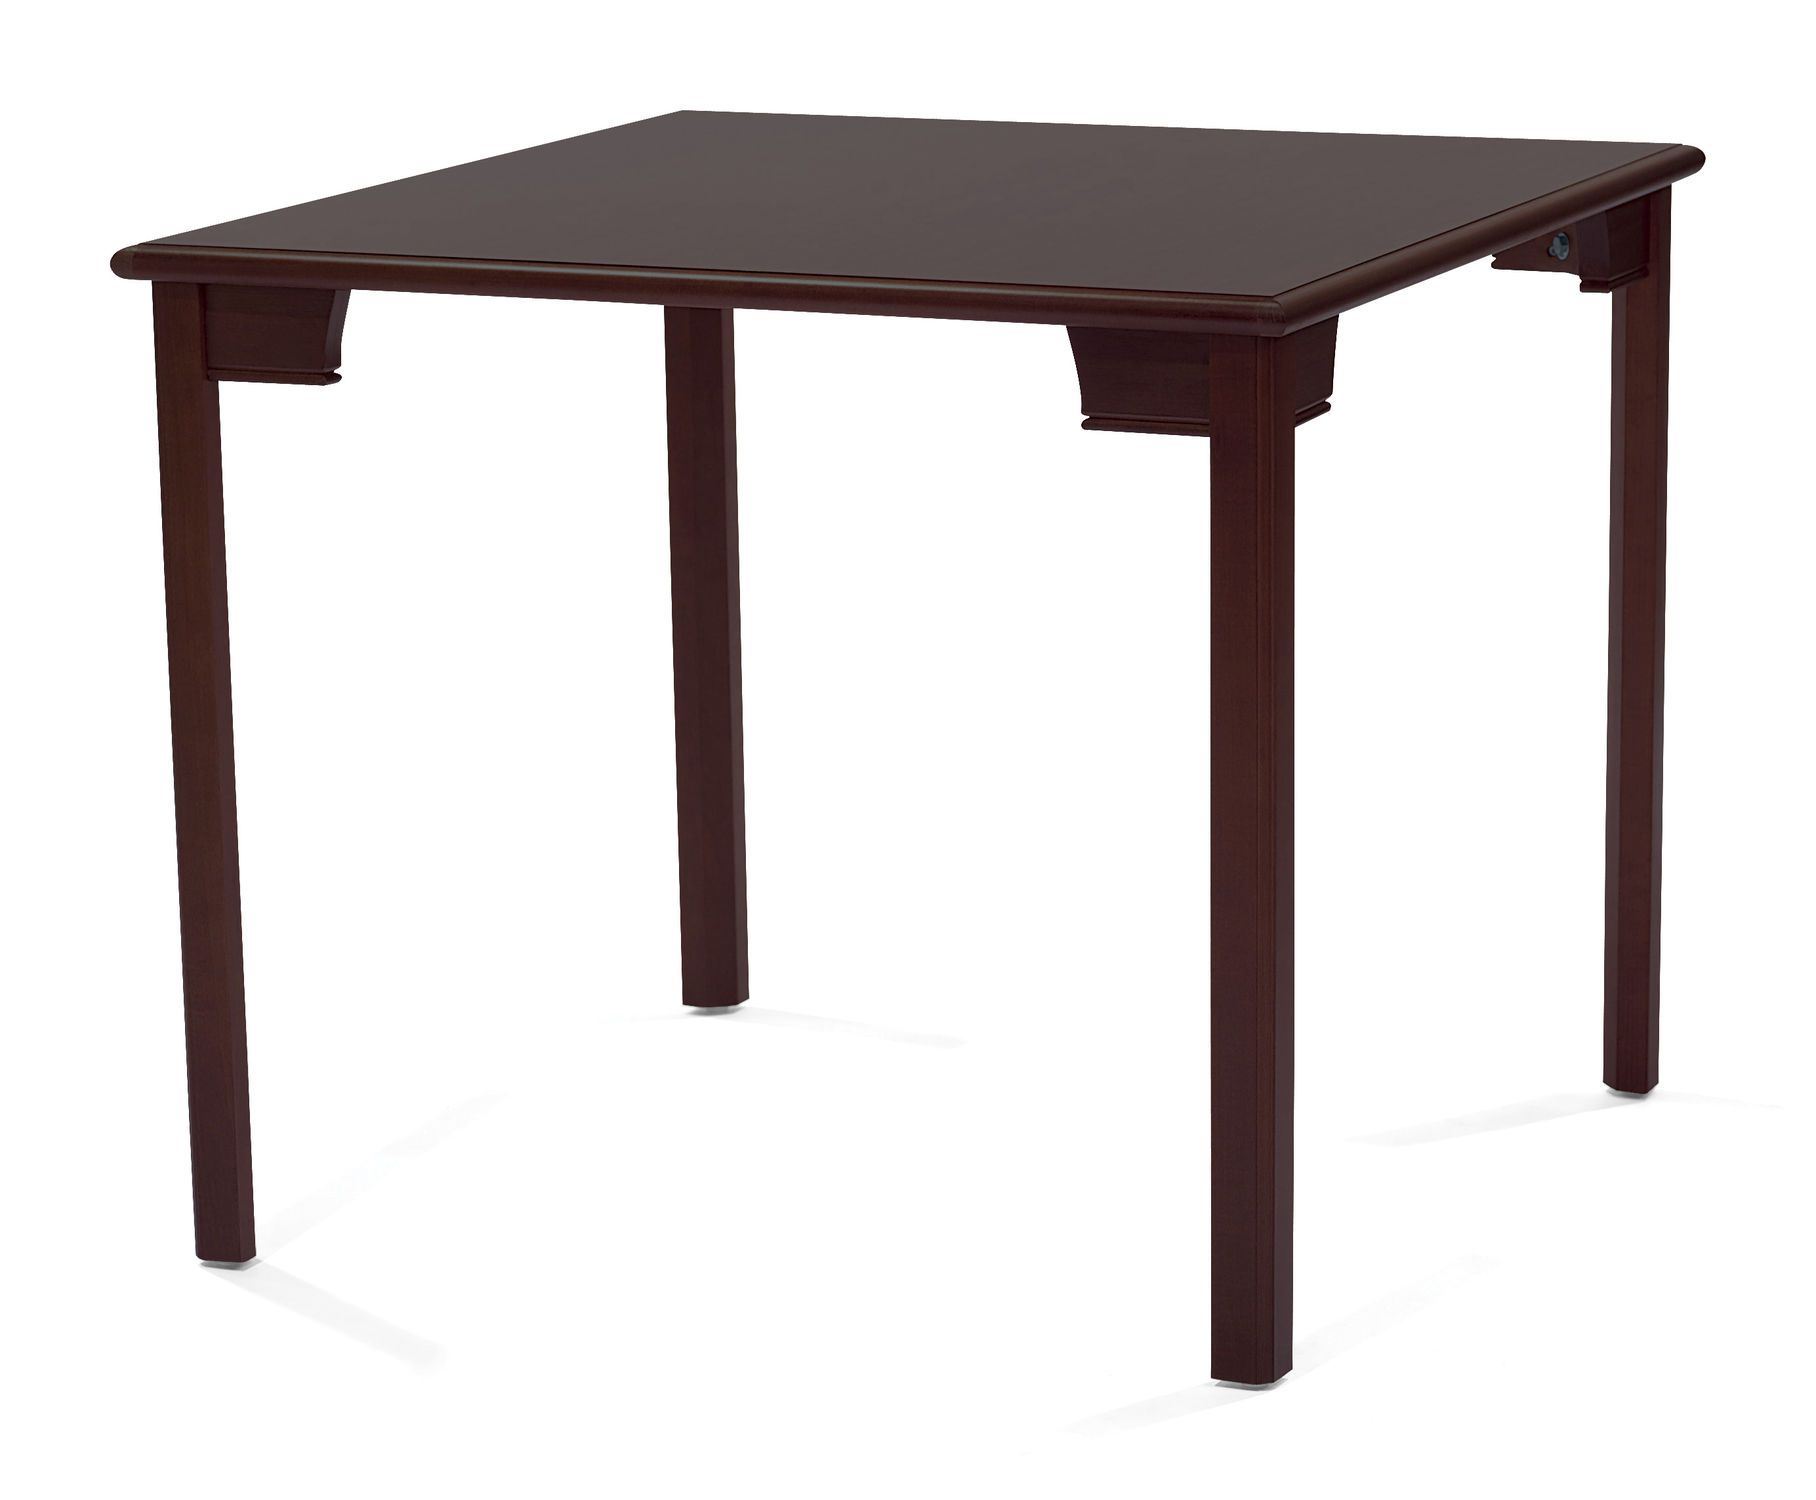 Dining table / square Stance Healthcare